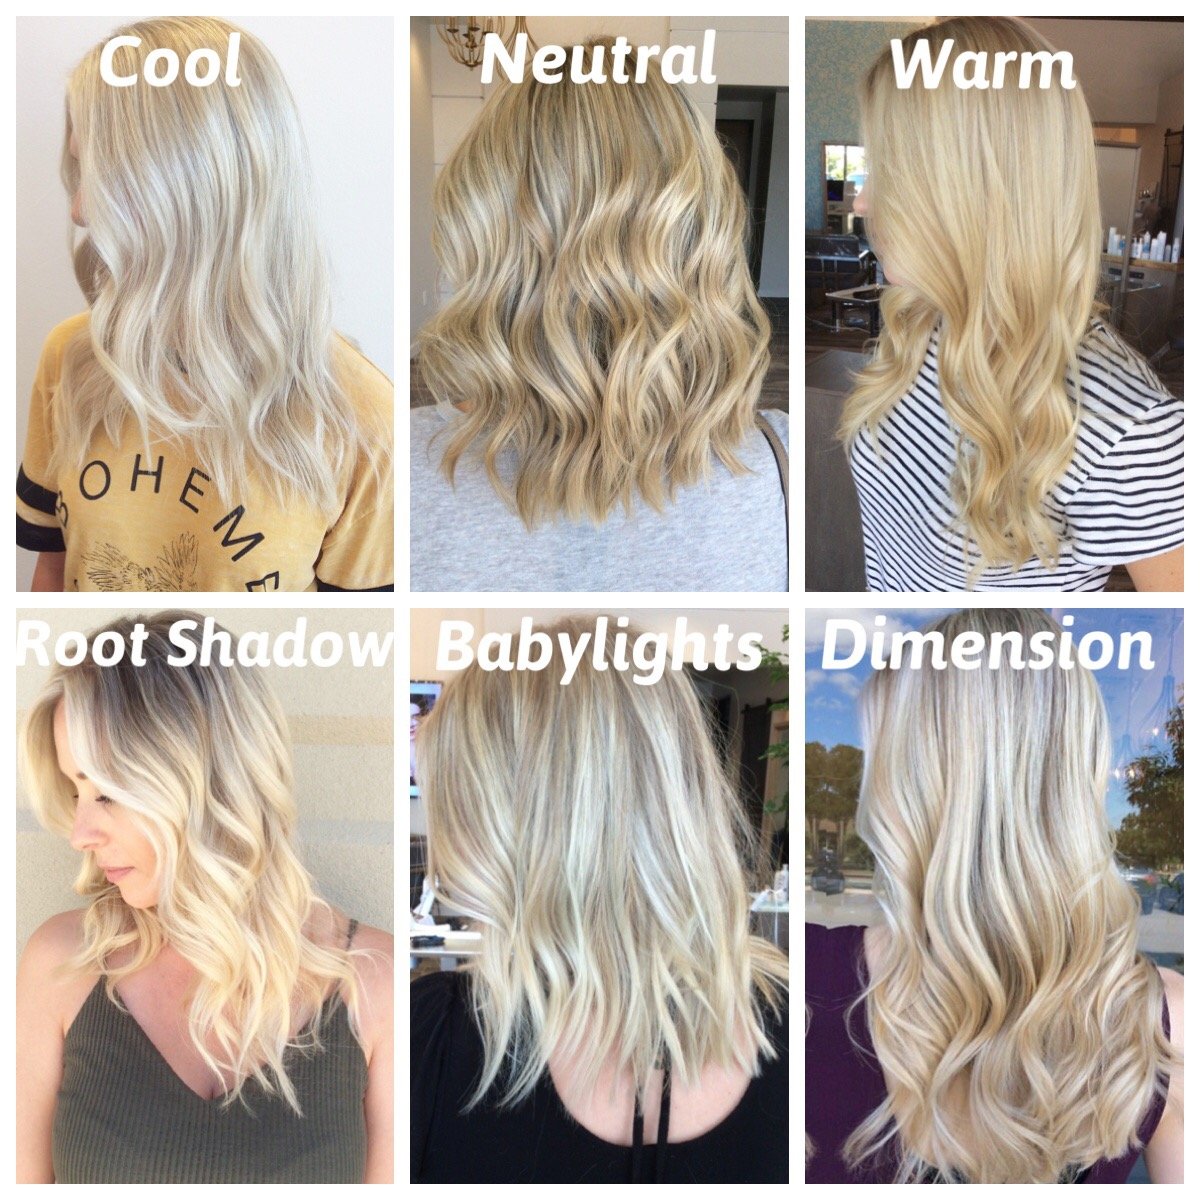 Blonde Hair Color Chart The Shades Kissed By The Sun Hera Hair